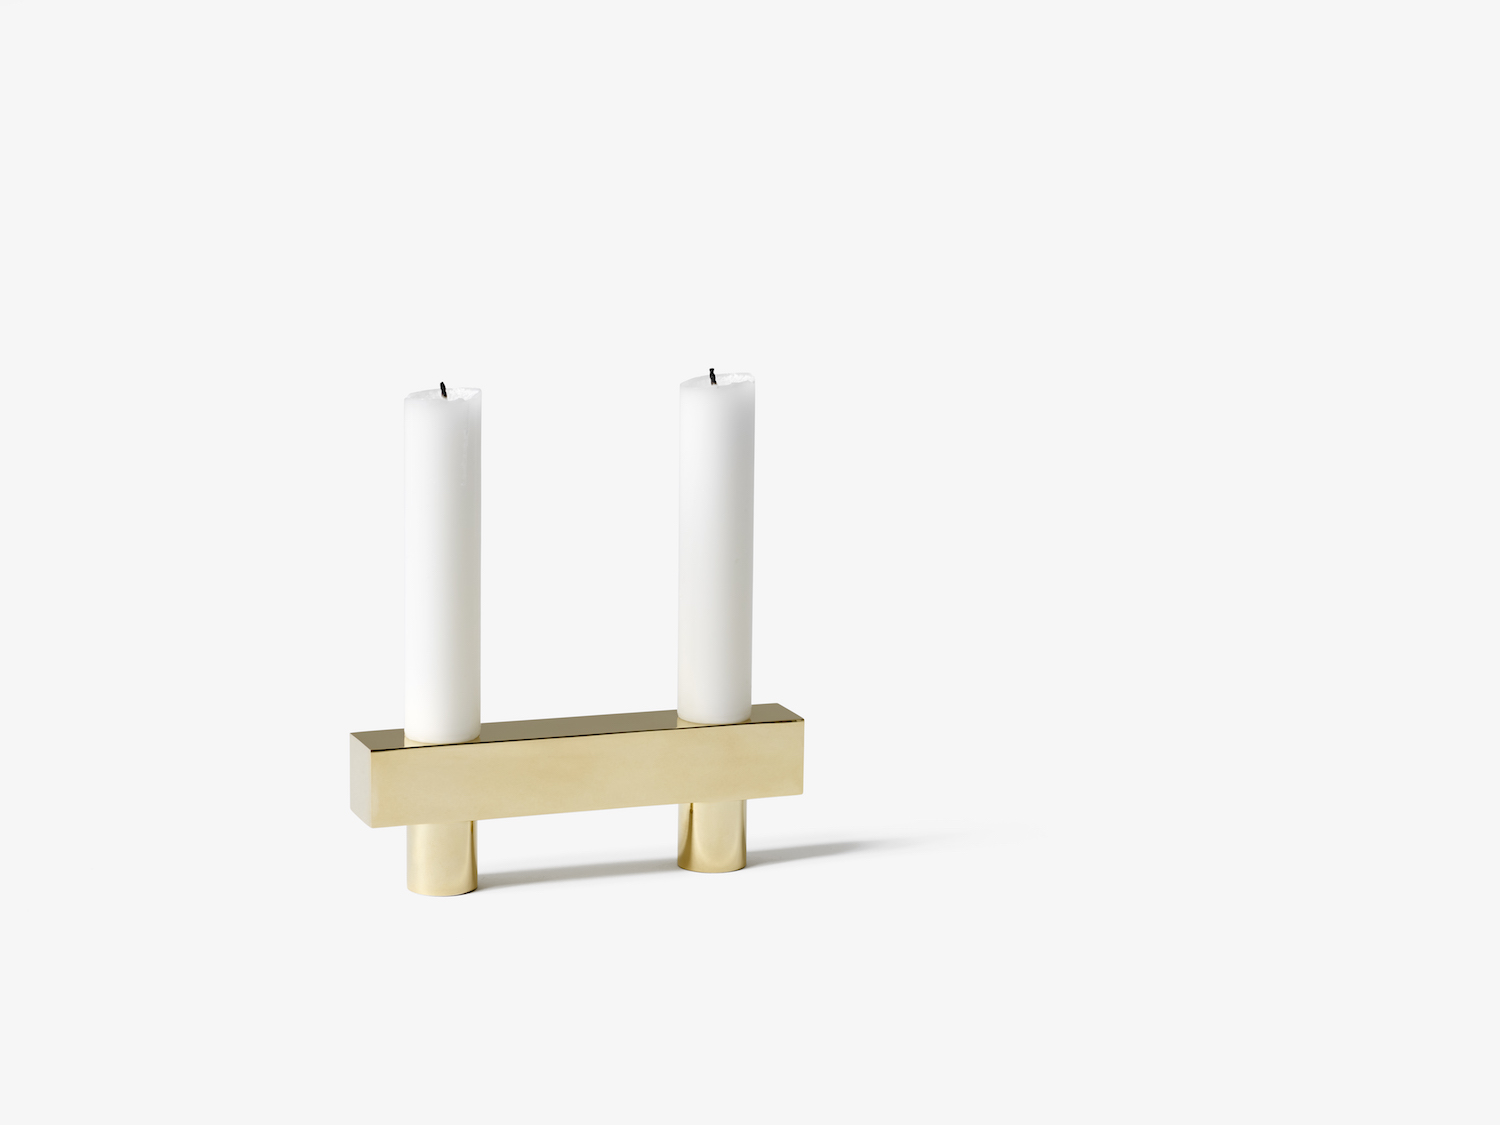 721 Grams candle holder by &tradition | Flodeau.com